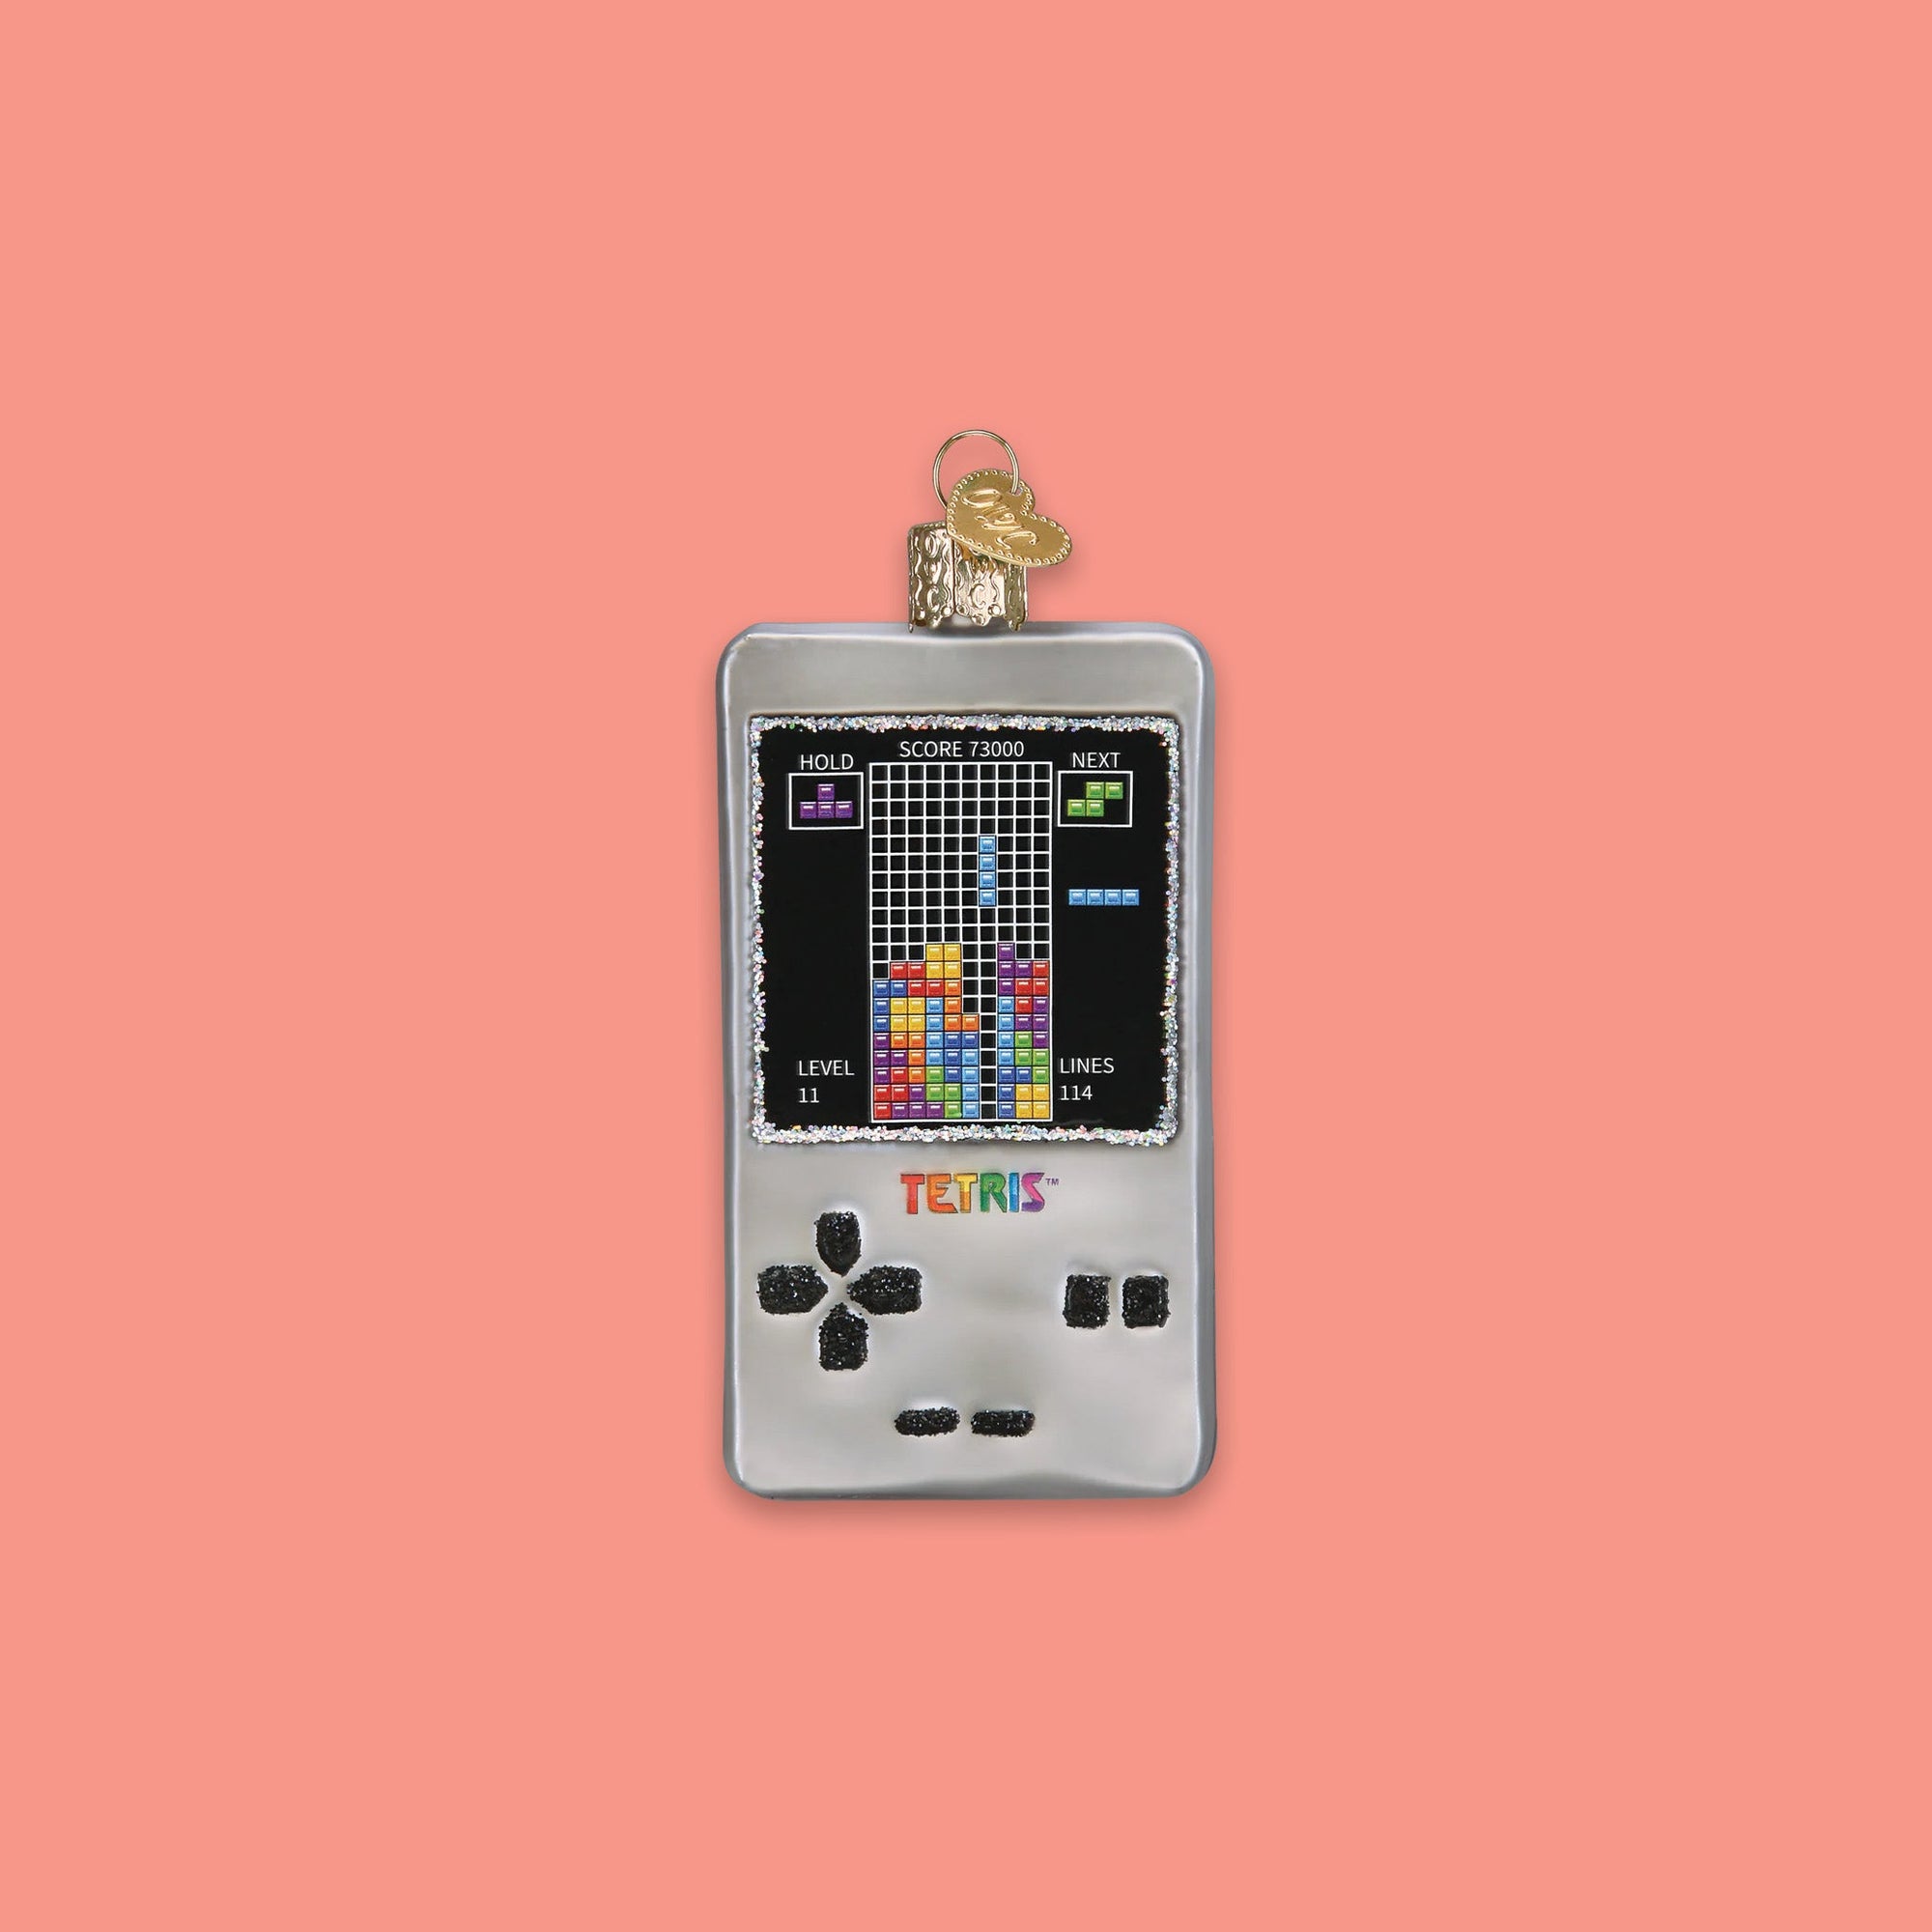 On a coral pink background sits a Tetris game glass ornament.